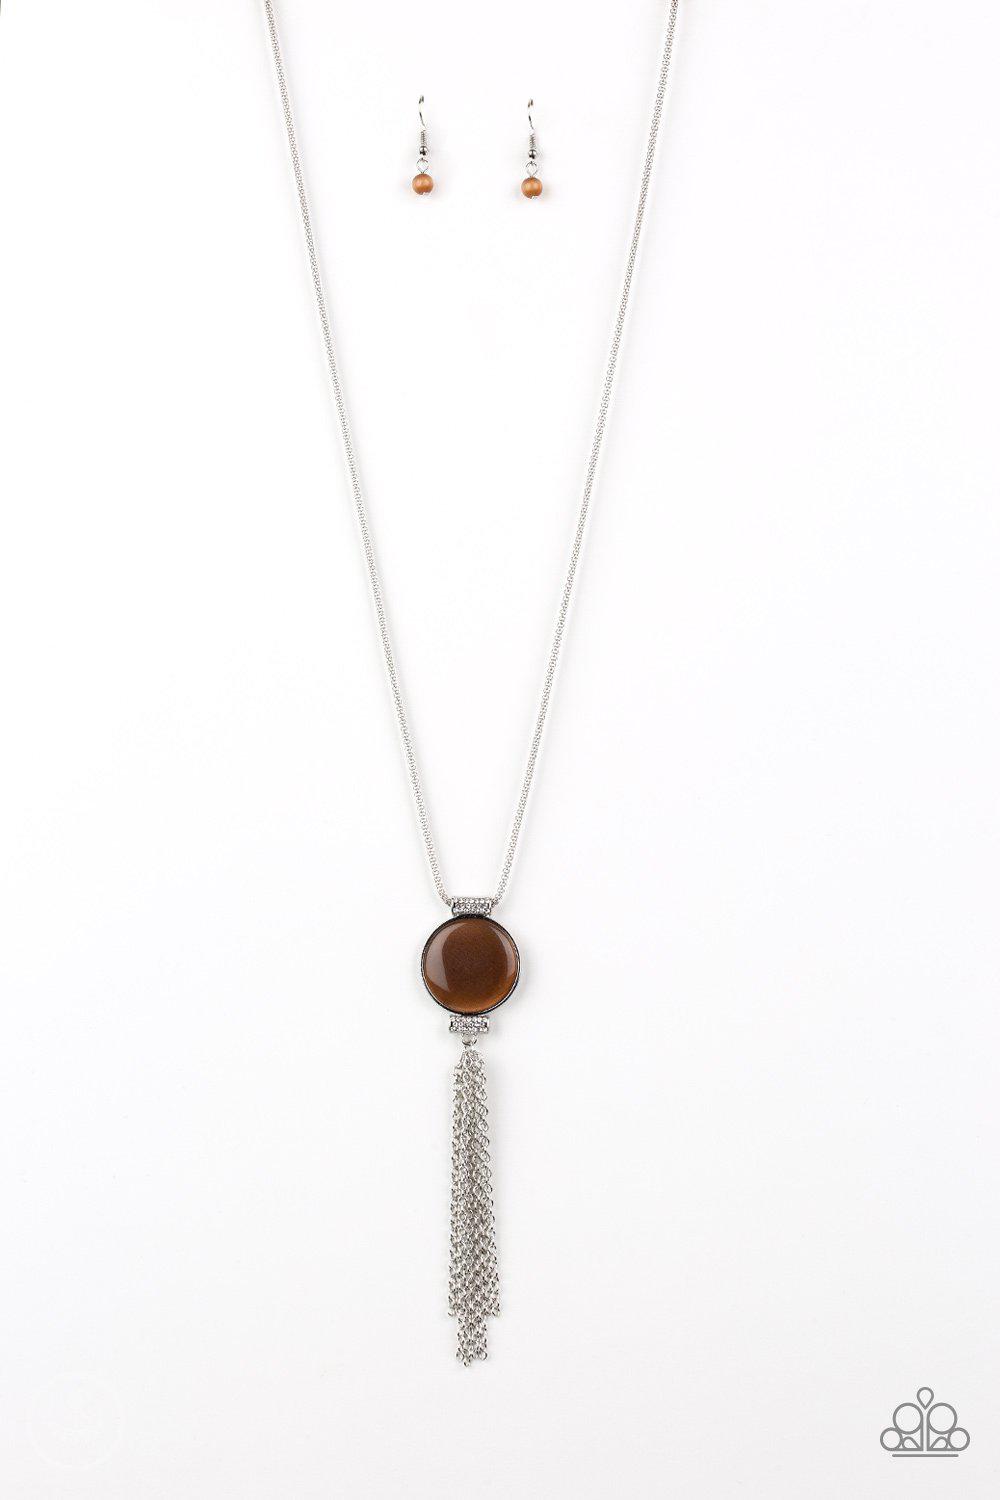 Happy As Can BEAM Brown Cat's Eye Stone Necklace - Paparazzi Accessories - lightbox -CarasShop.com - $5 Jewelry by Cara Jewels